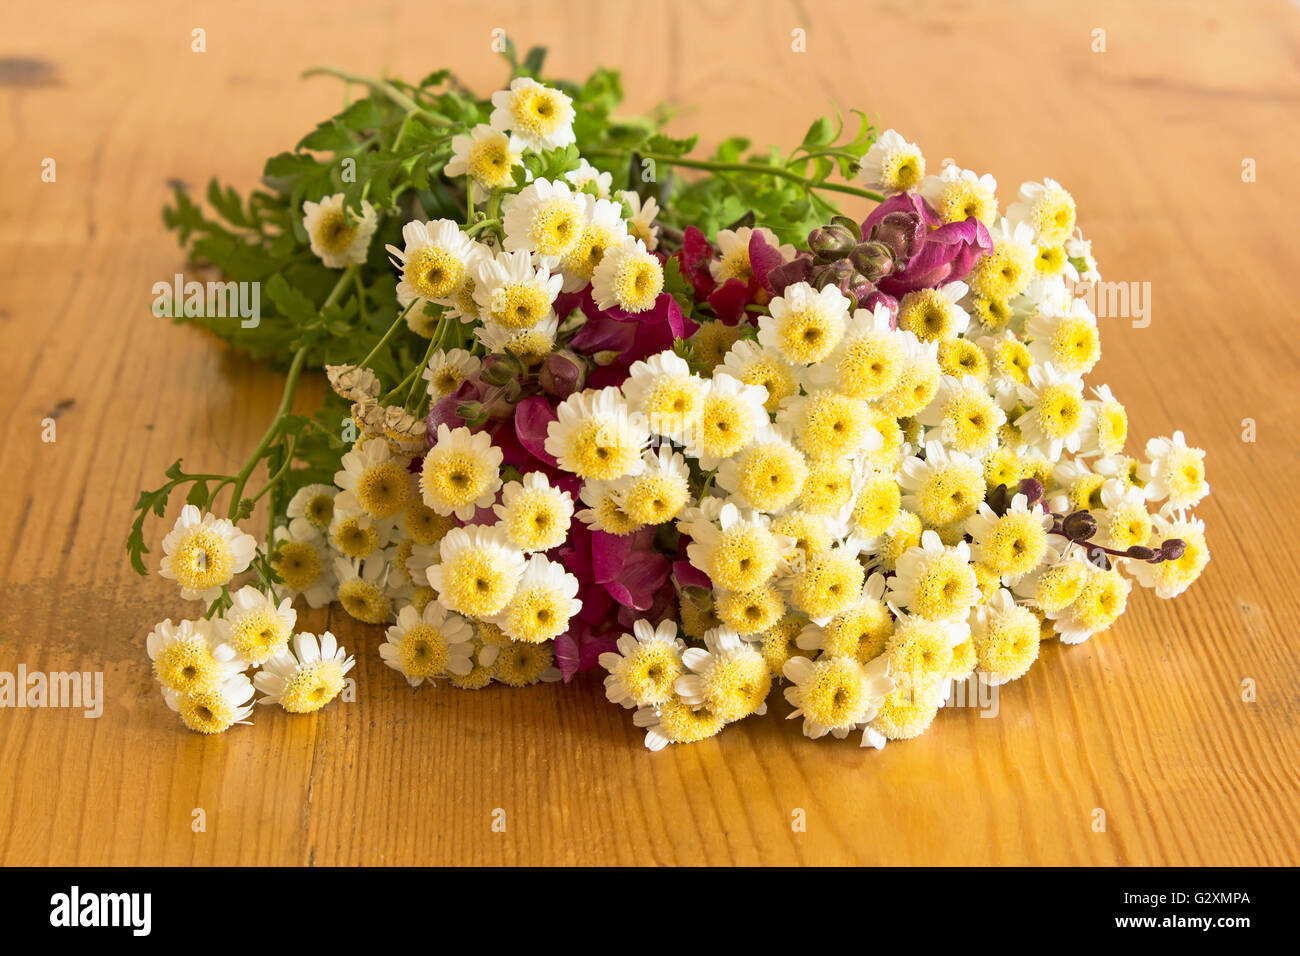 Small Daisies on a Wooden Table. Stock Photo